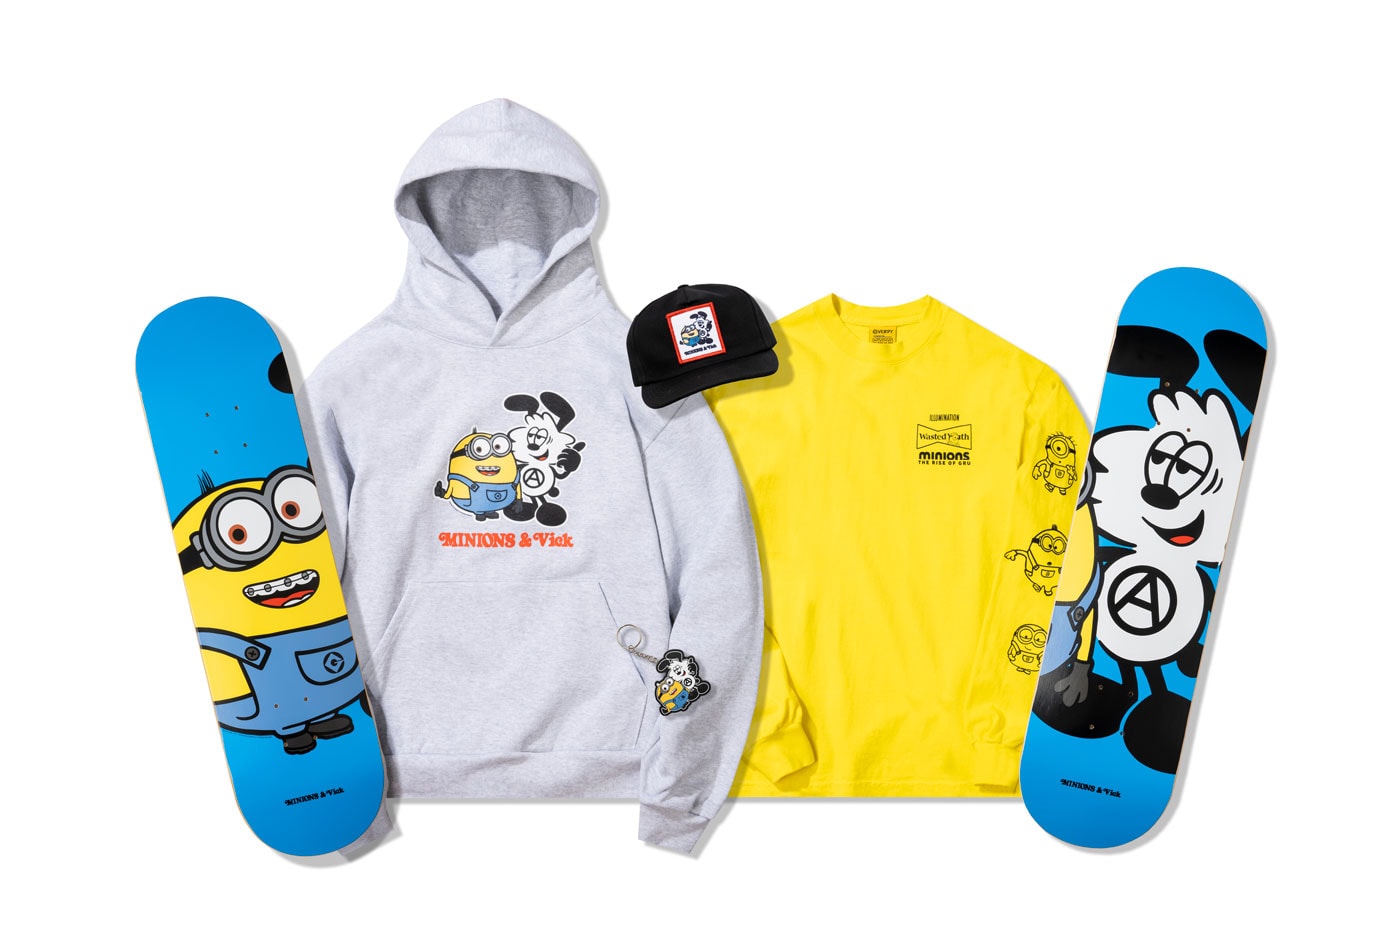 Verdy Minions yellow launch secomnd capsule collection skateboards hoodies shirts hats caps girls don't cry wasted youth tulip release info date price